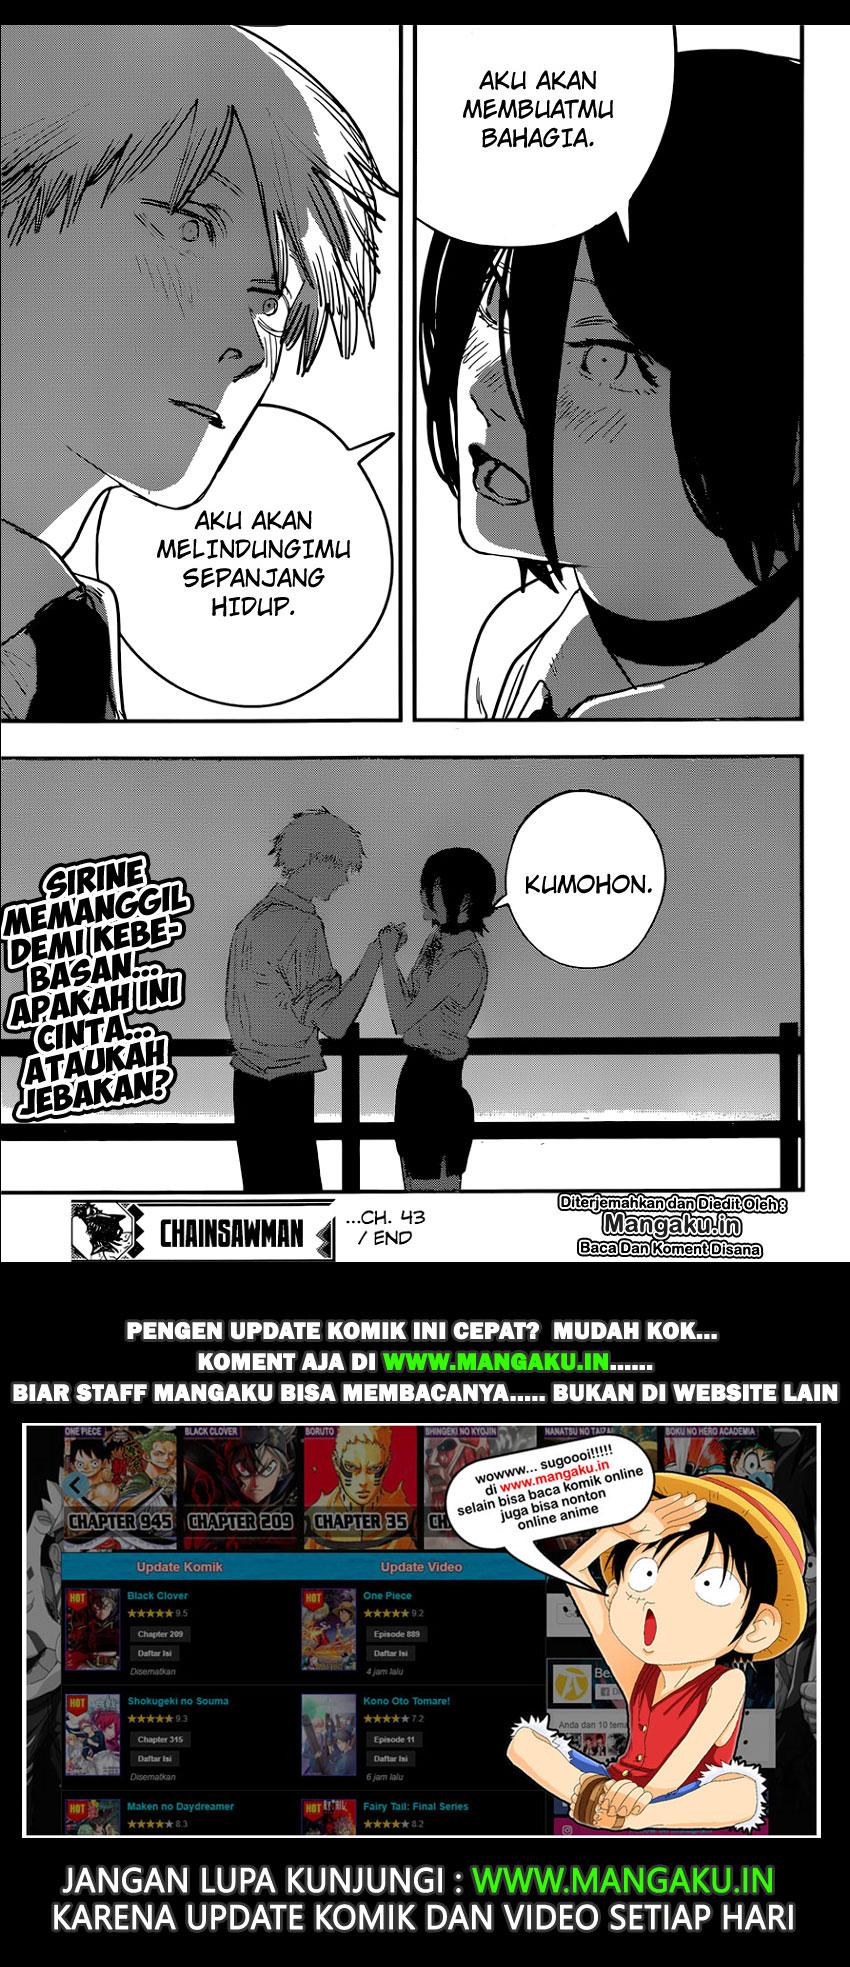 Chainsaw Man Chapter 43